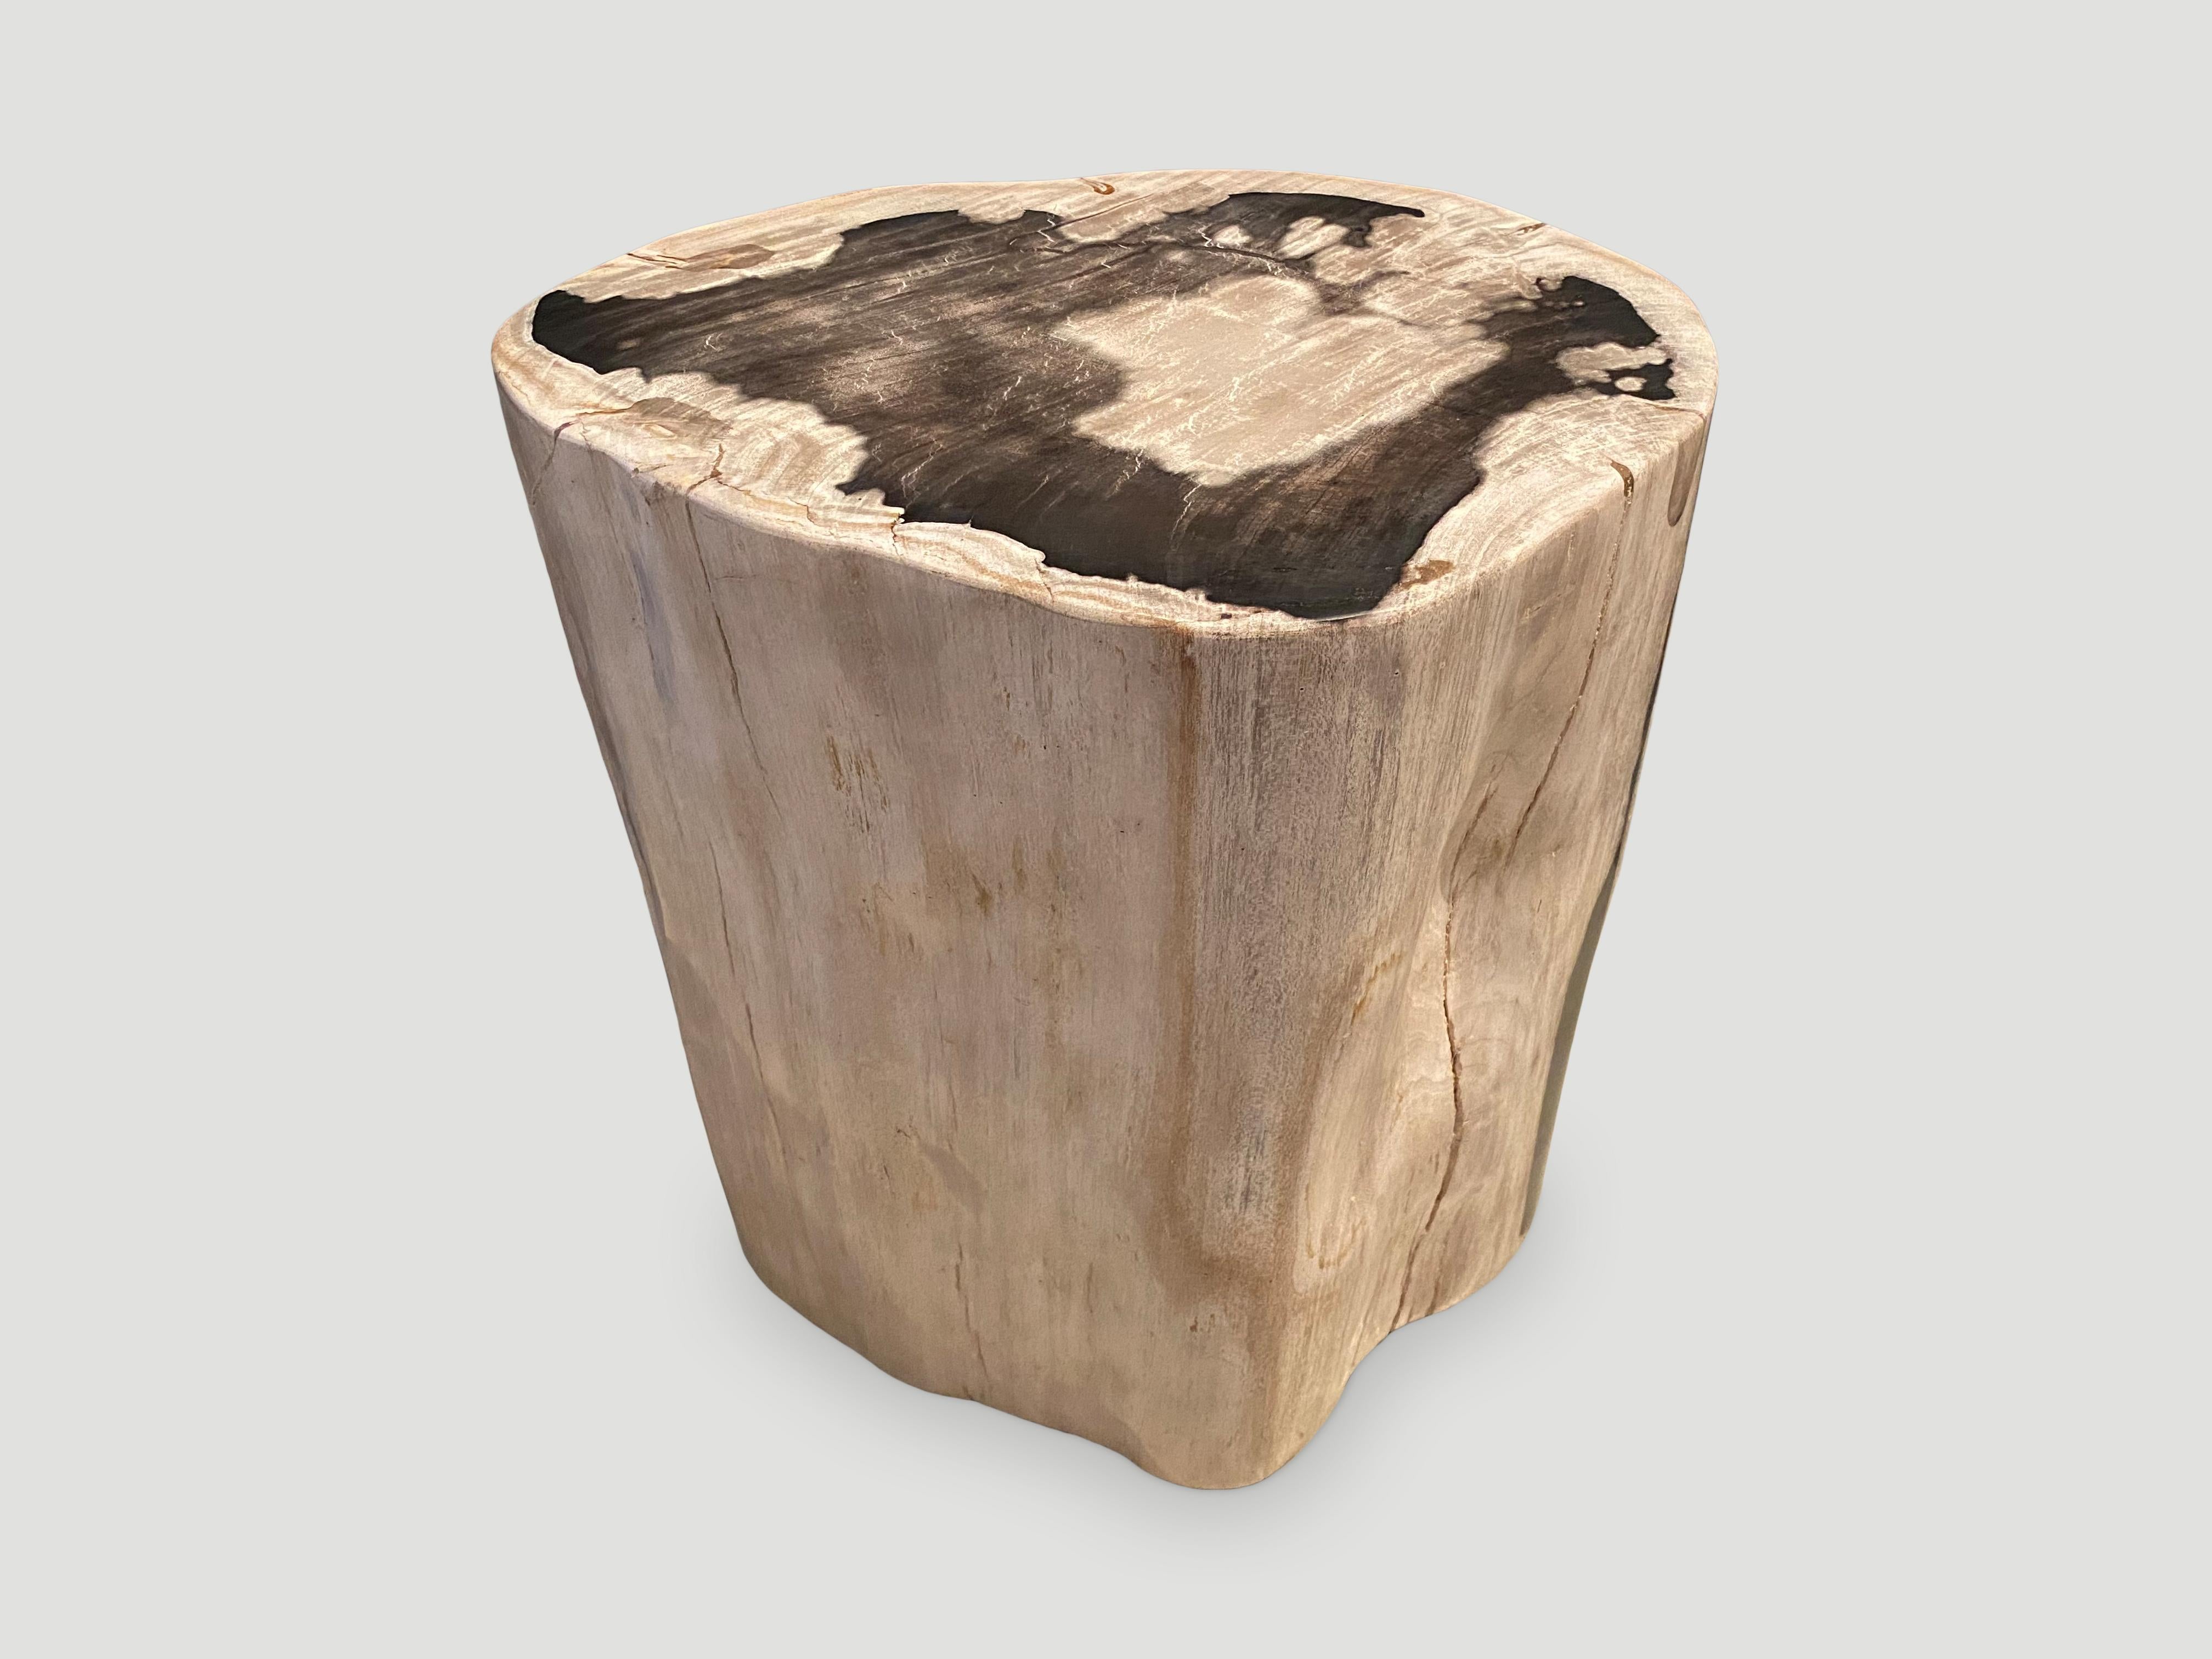 Beautiful markings and contrasting tones on this high quality petrified wood side table.

As with a diamond, we polish the highest quality fossilized petrified wood, using our latest ground breaking technology, to reveal its natural beauty and